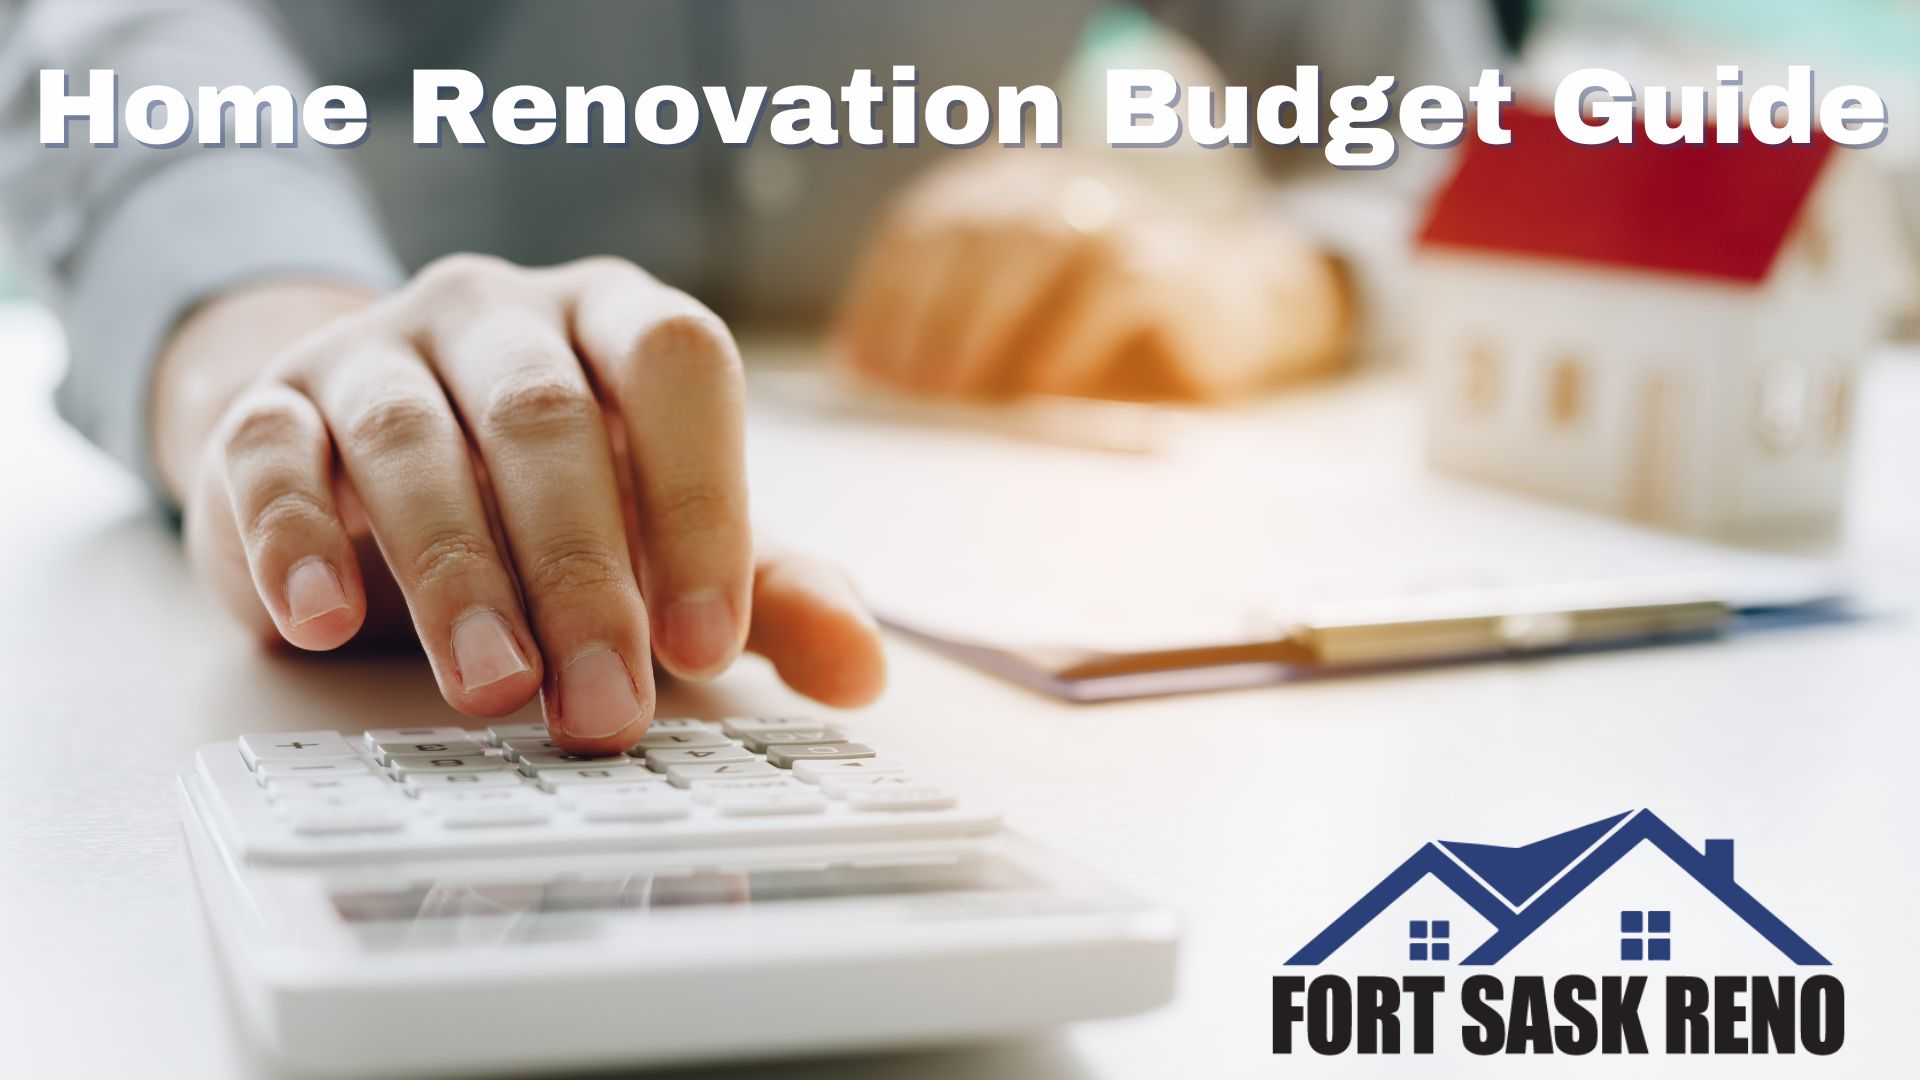 Home Renovation Budget Guide In Fort Sask